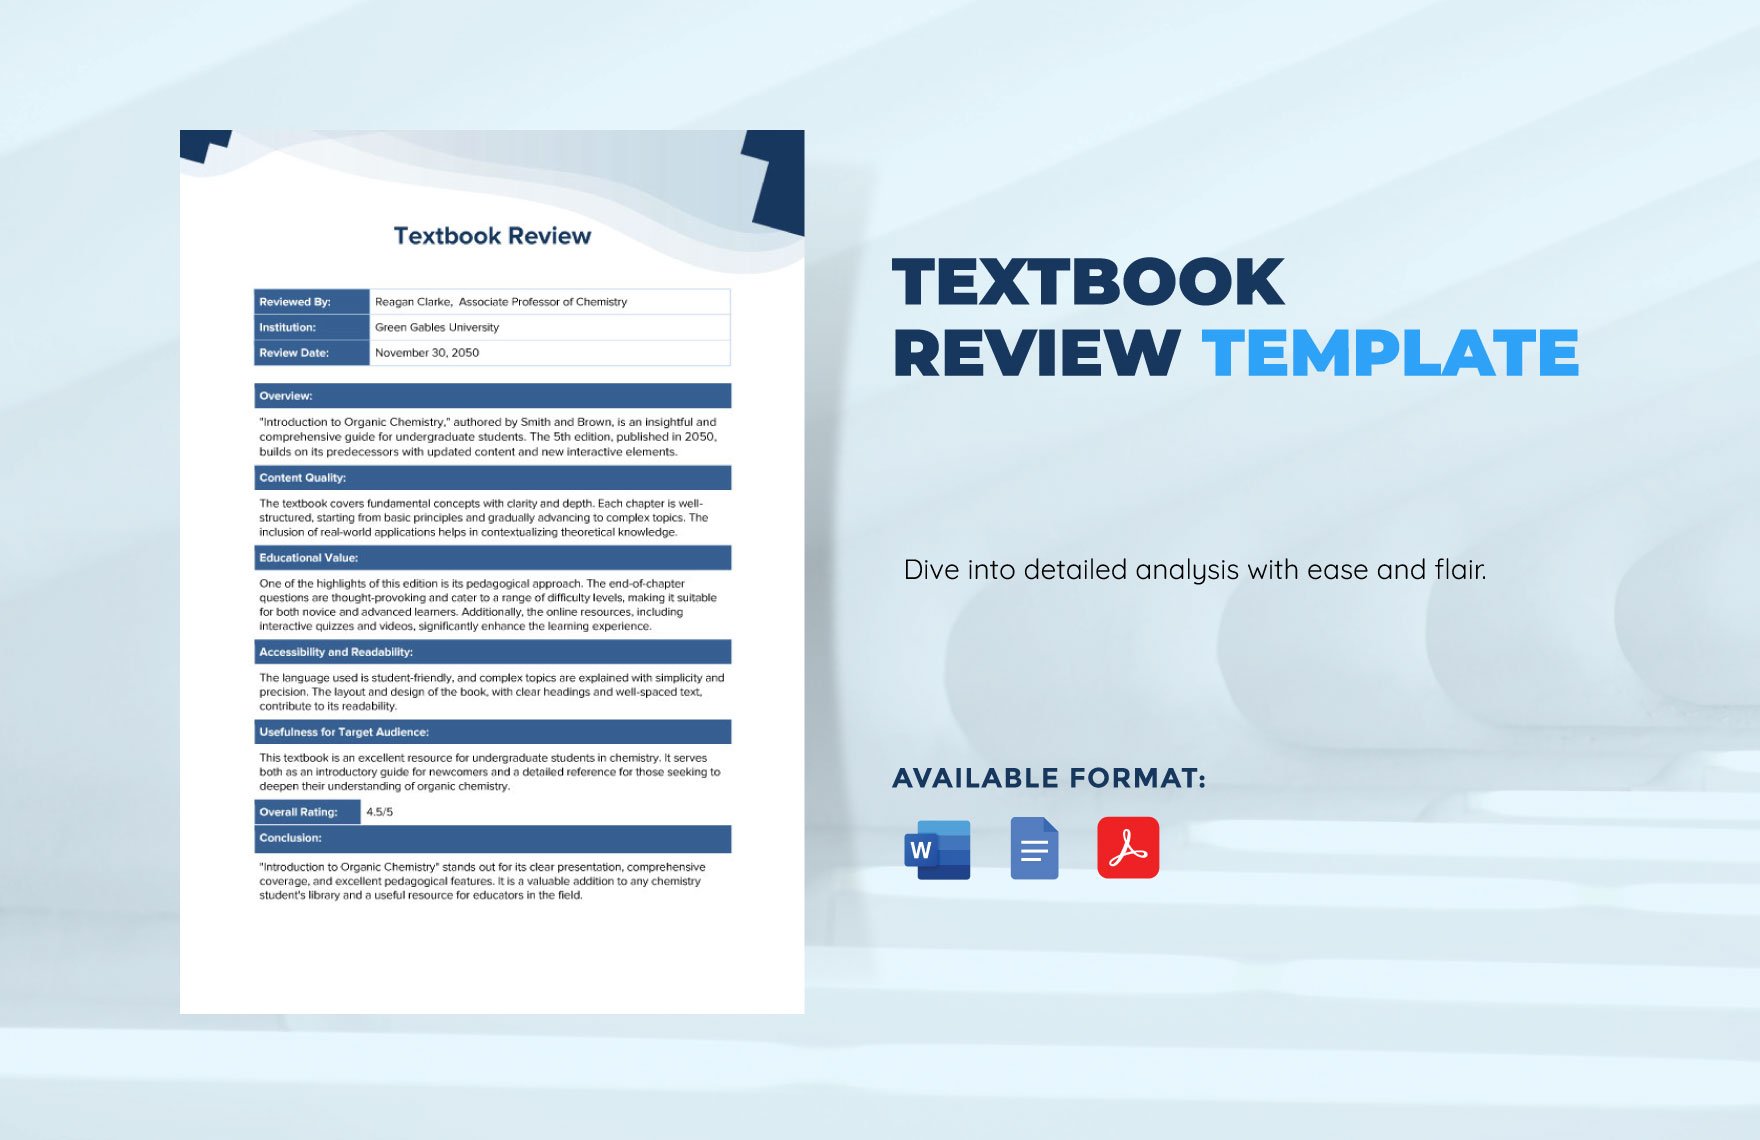 Textbook Review Template